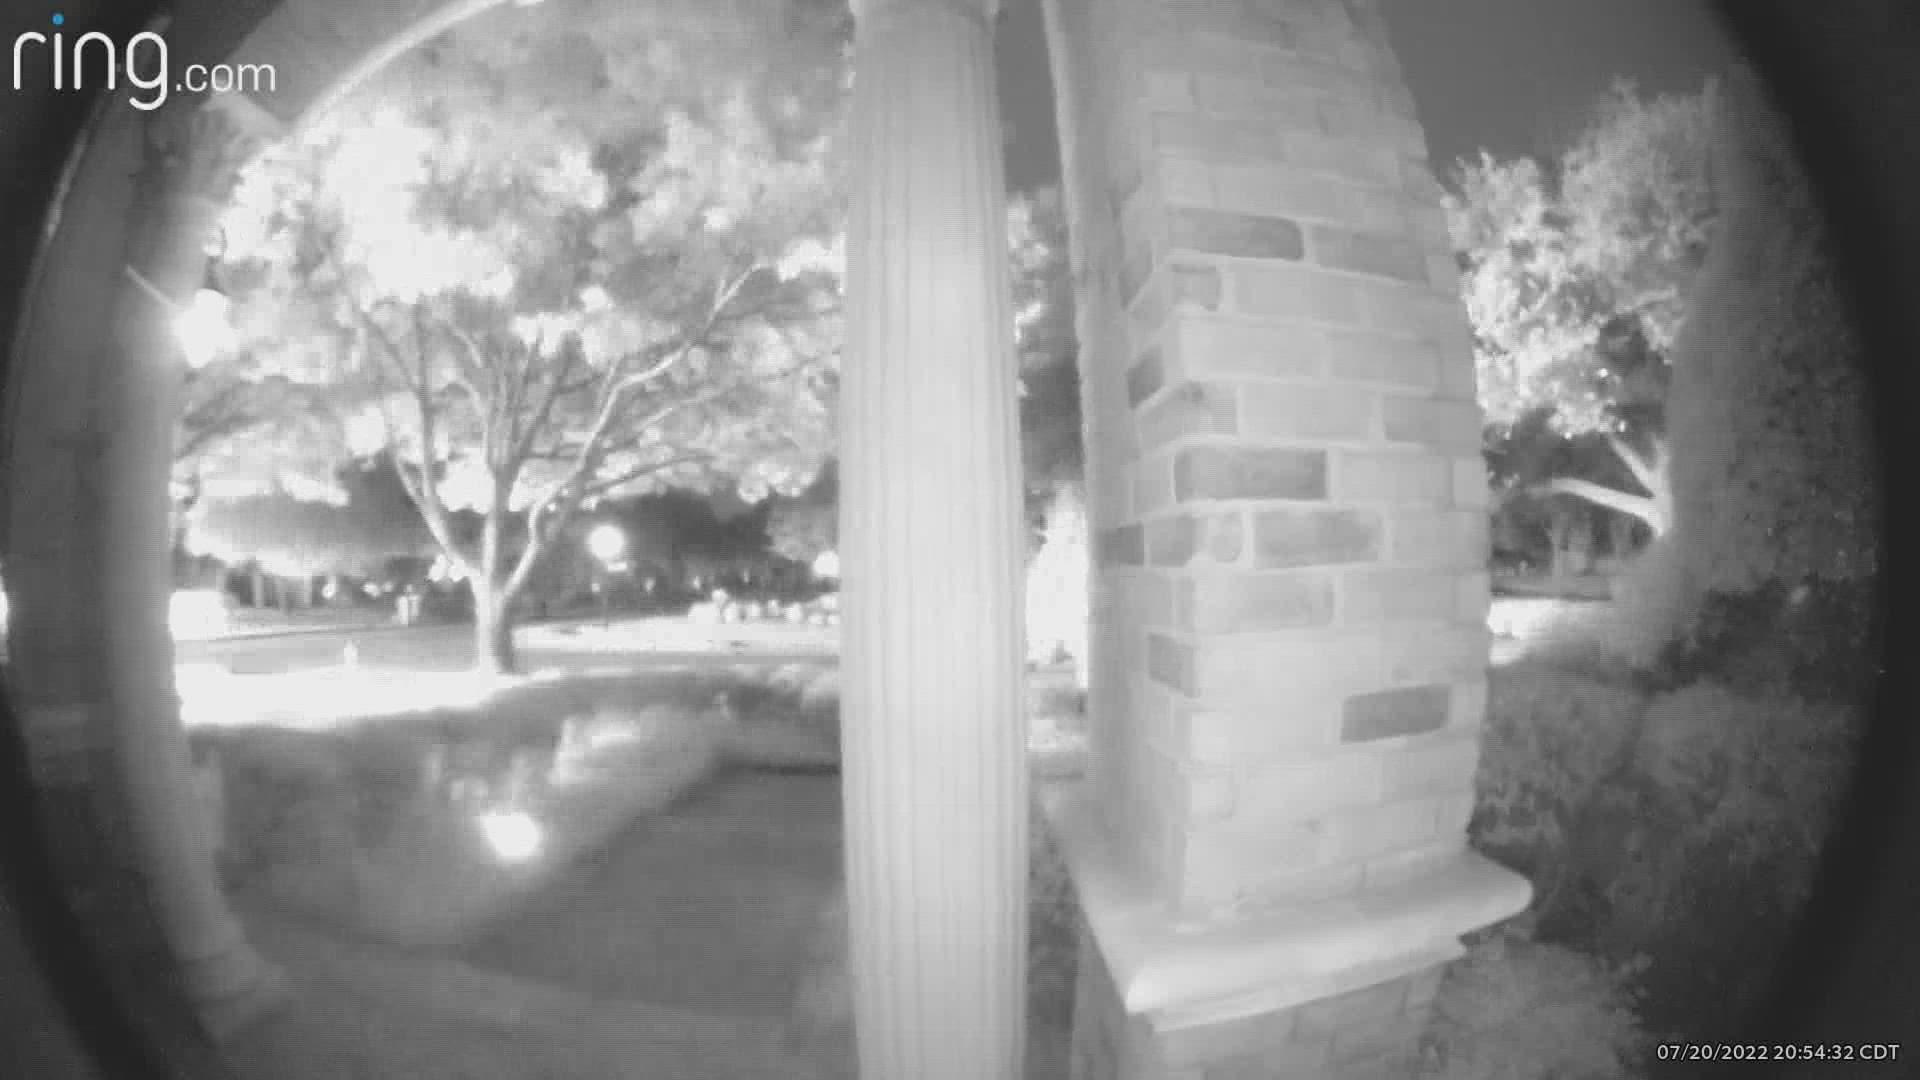 Here's what one nearby doorbell camera captured Wednesday night.